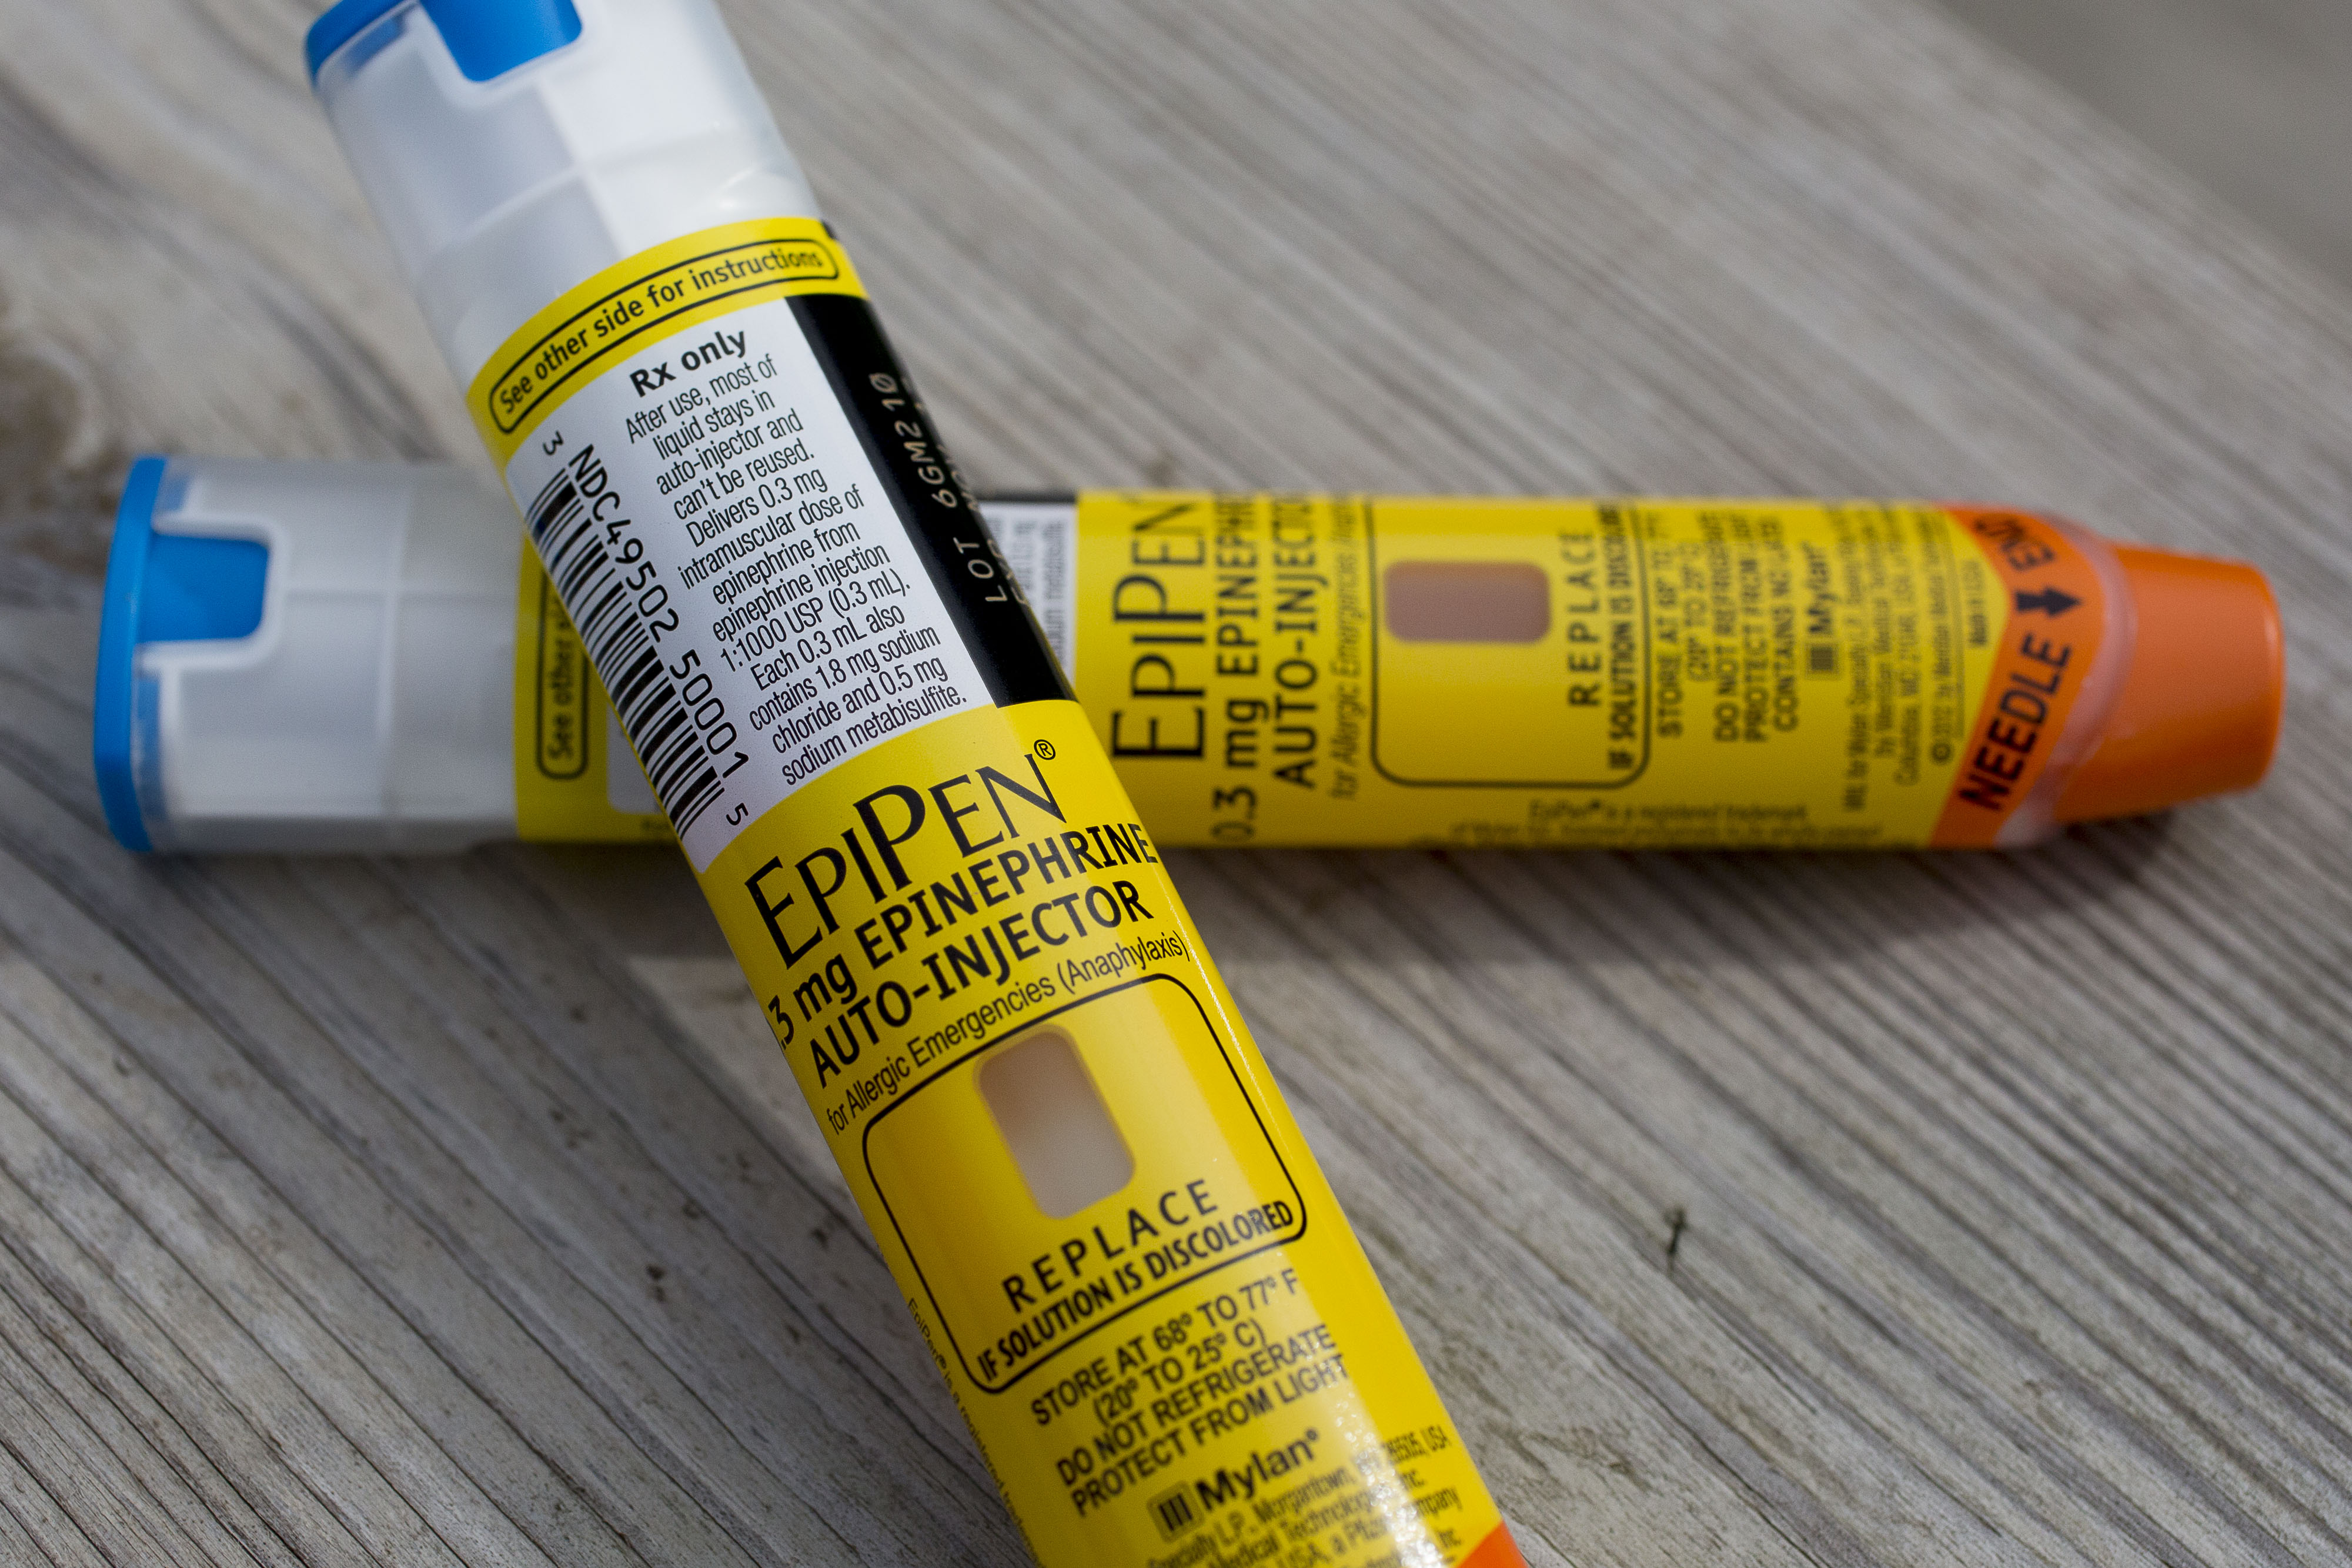 Mylan NV's EpiPen allergy shots sit on display for a photograph in Princeton, Illinois, U.S., on Friday, Aug. 26, 2016. (Daniel Acker&mdash;Bloomberg / Getty Images)